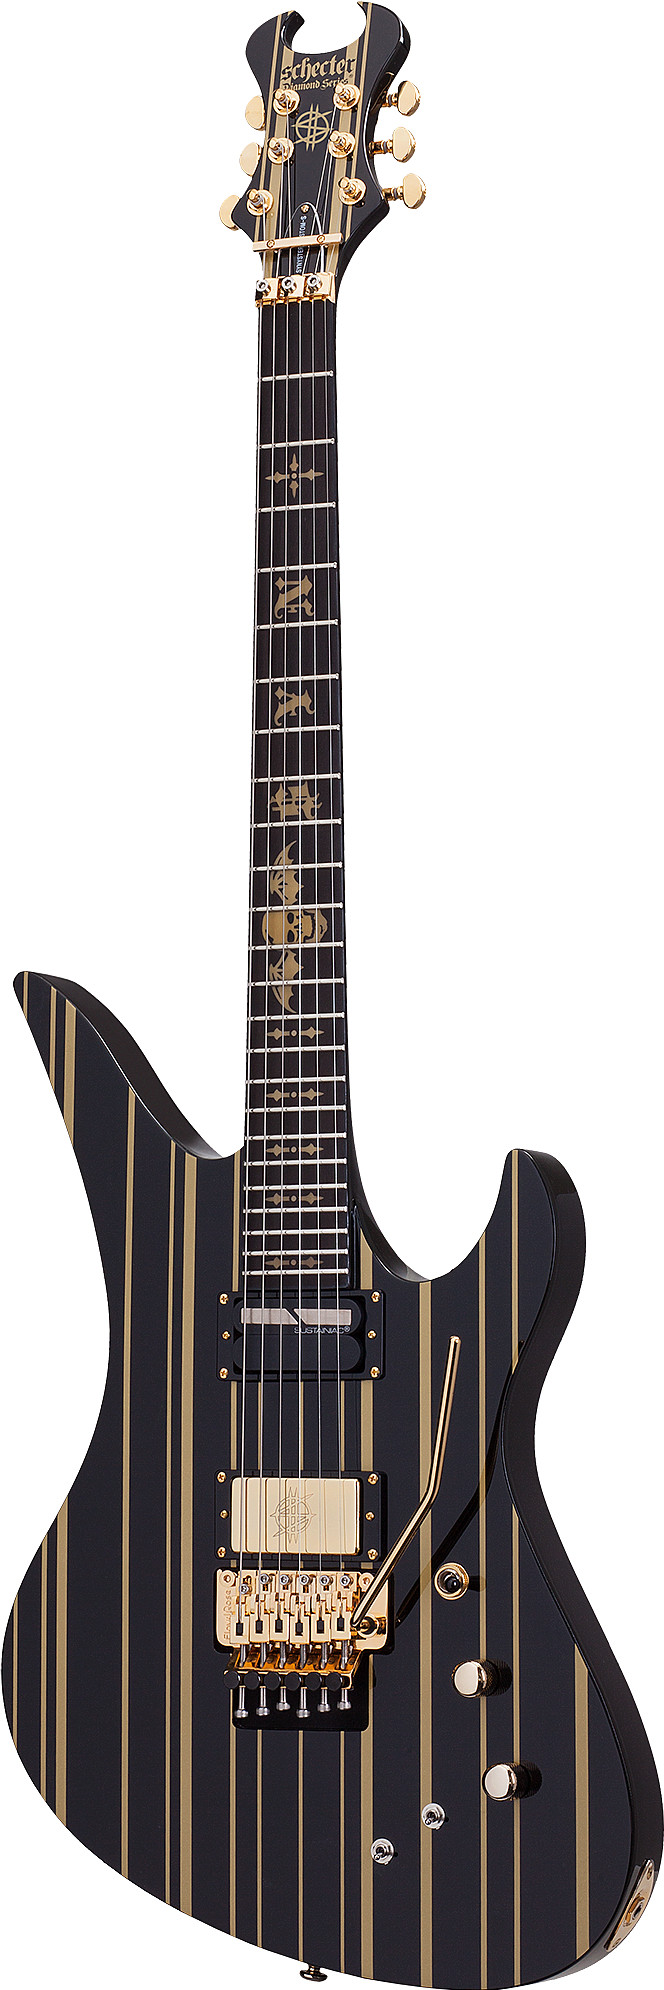 Synyster Custom-S (2018) by Schecter